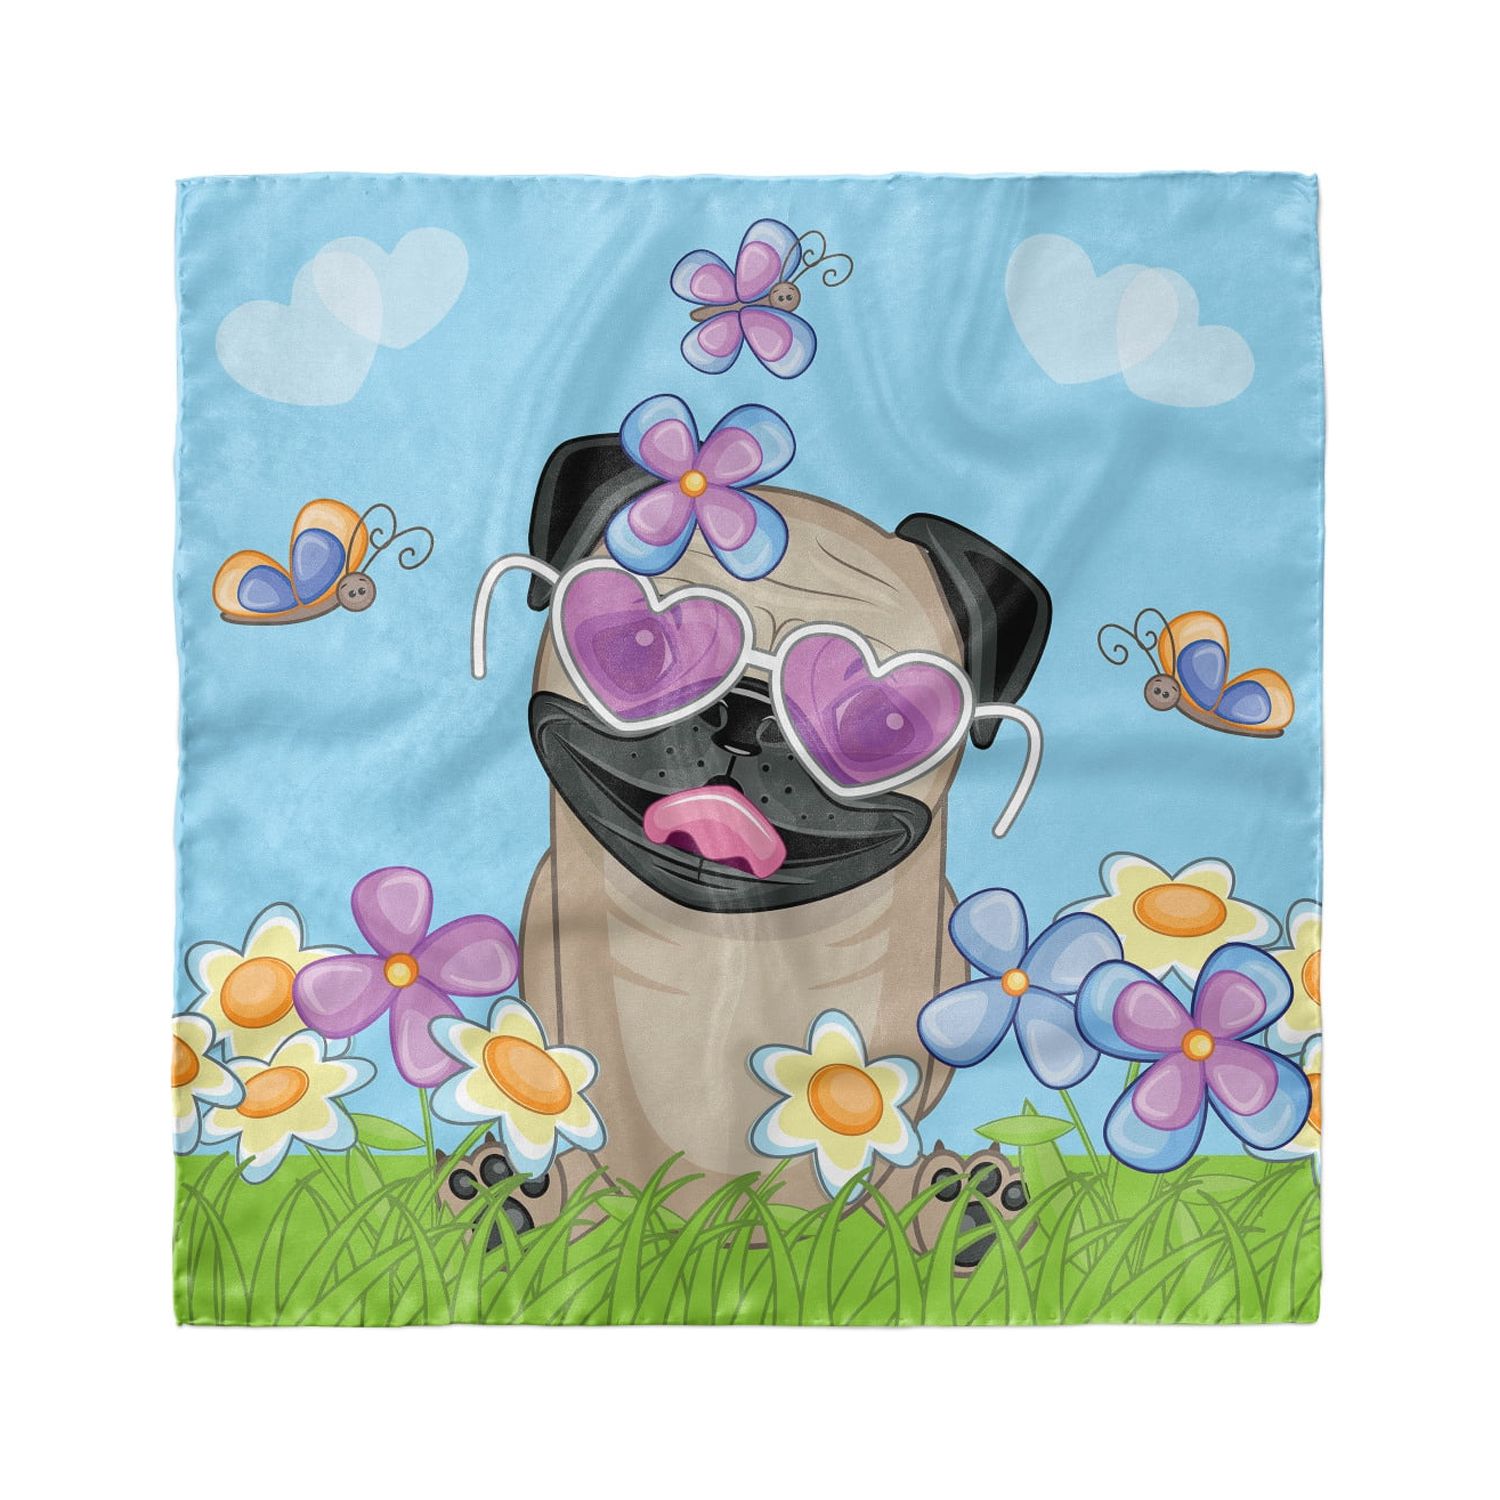 Pug Head Scarf, Puppy on the Field Flowers, Head Wrap, 3 Sizes, by Ambesonne - image 1 of 2